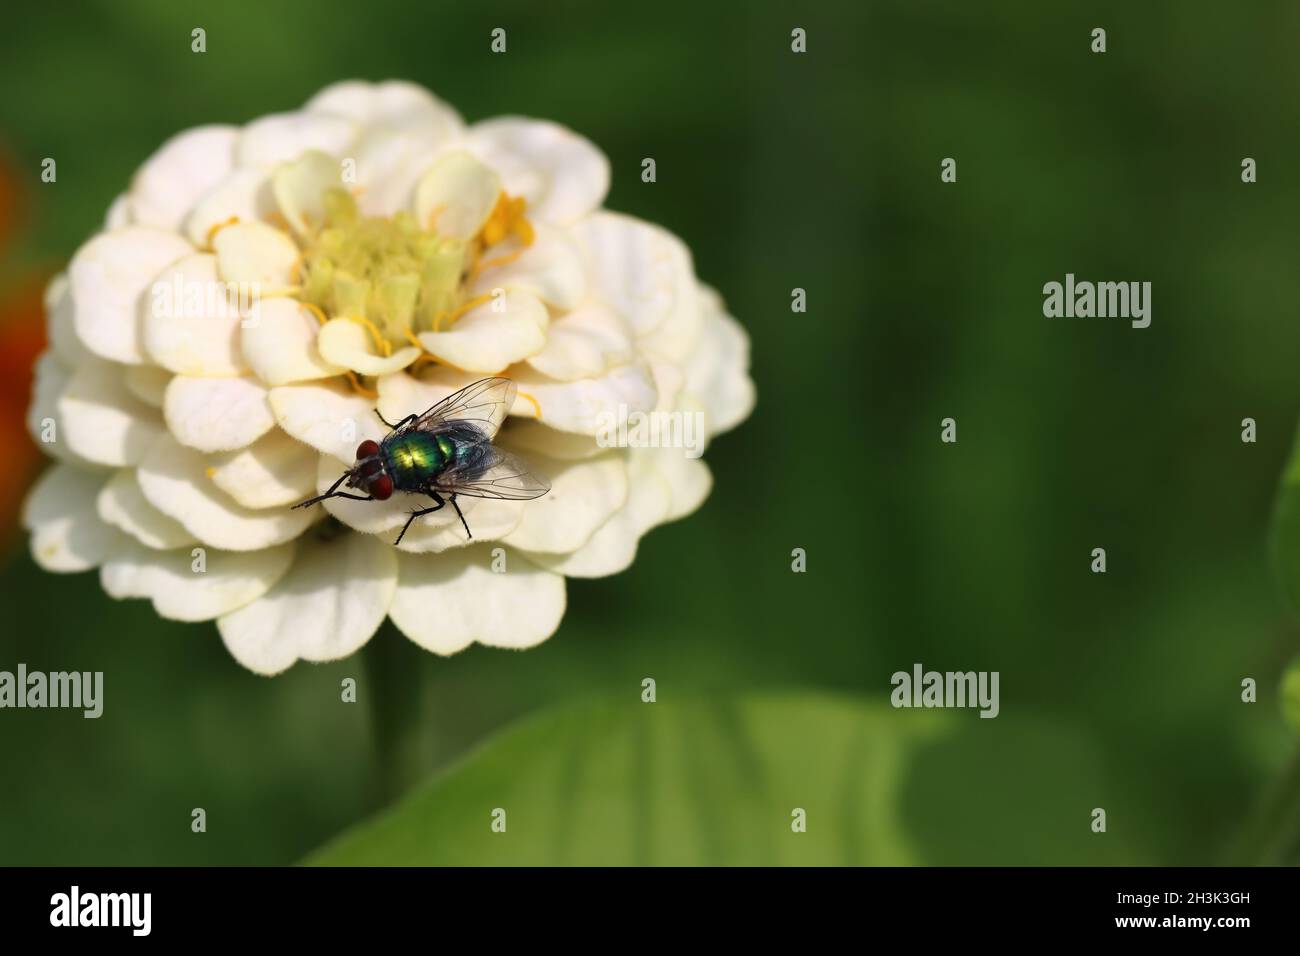 a small metallic green shiny fly rests on a zinnia and cleans the front feet , copy space Stock Photo